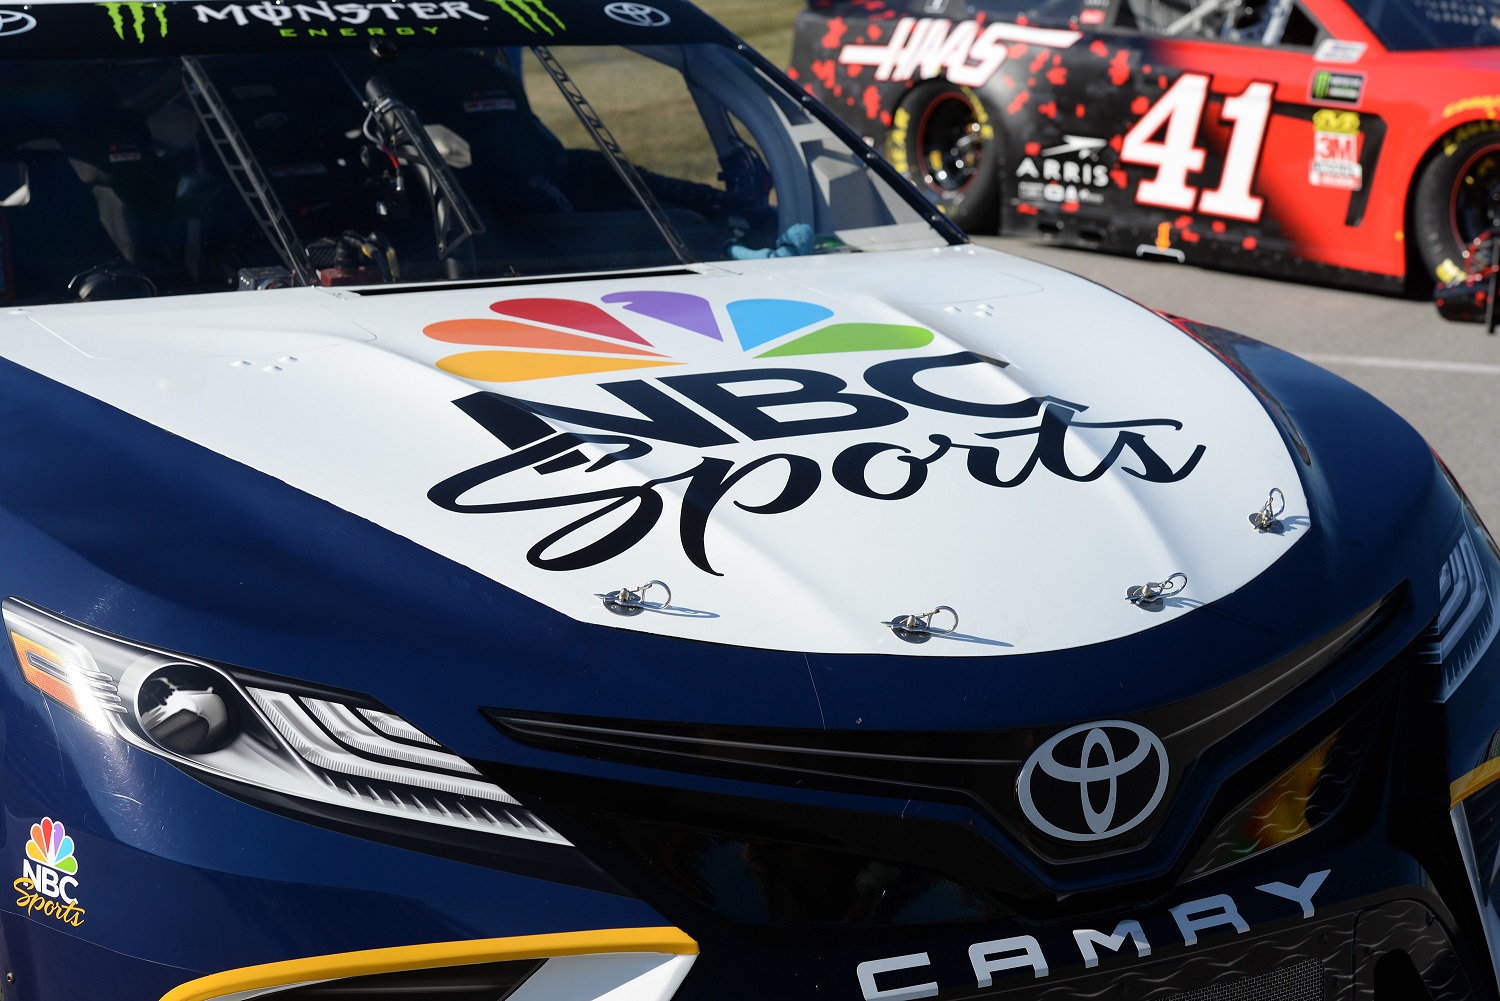 The NBC Sports car sits on pit lane before the start of the Monster Energy NASCAR Cup Series Quaker State 400 on July 13, 2019, at Kentucky Speedway. |  Michael Allio/Icon Sportswire via Getty Images